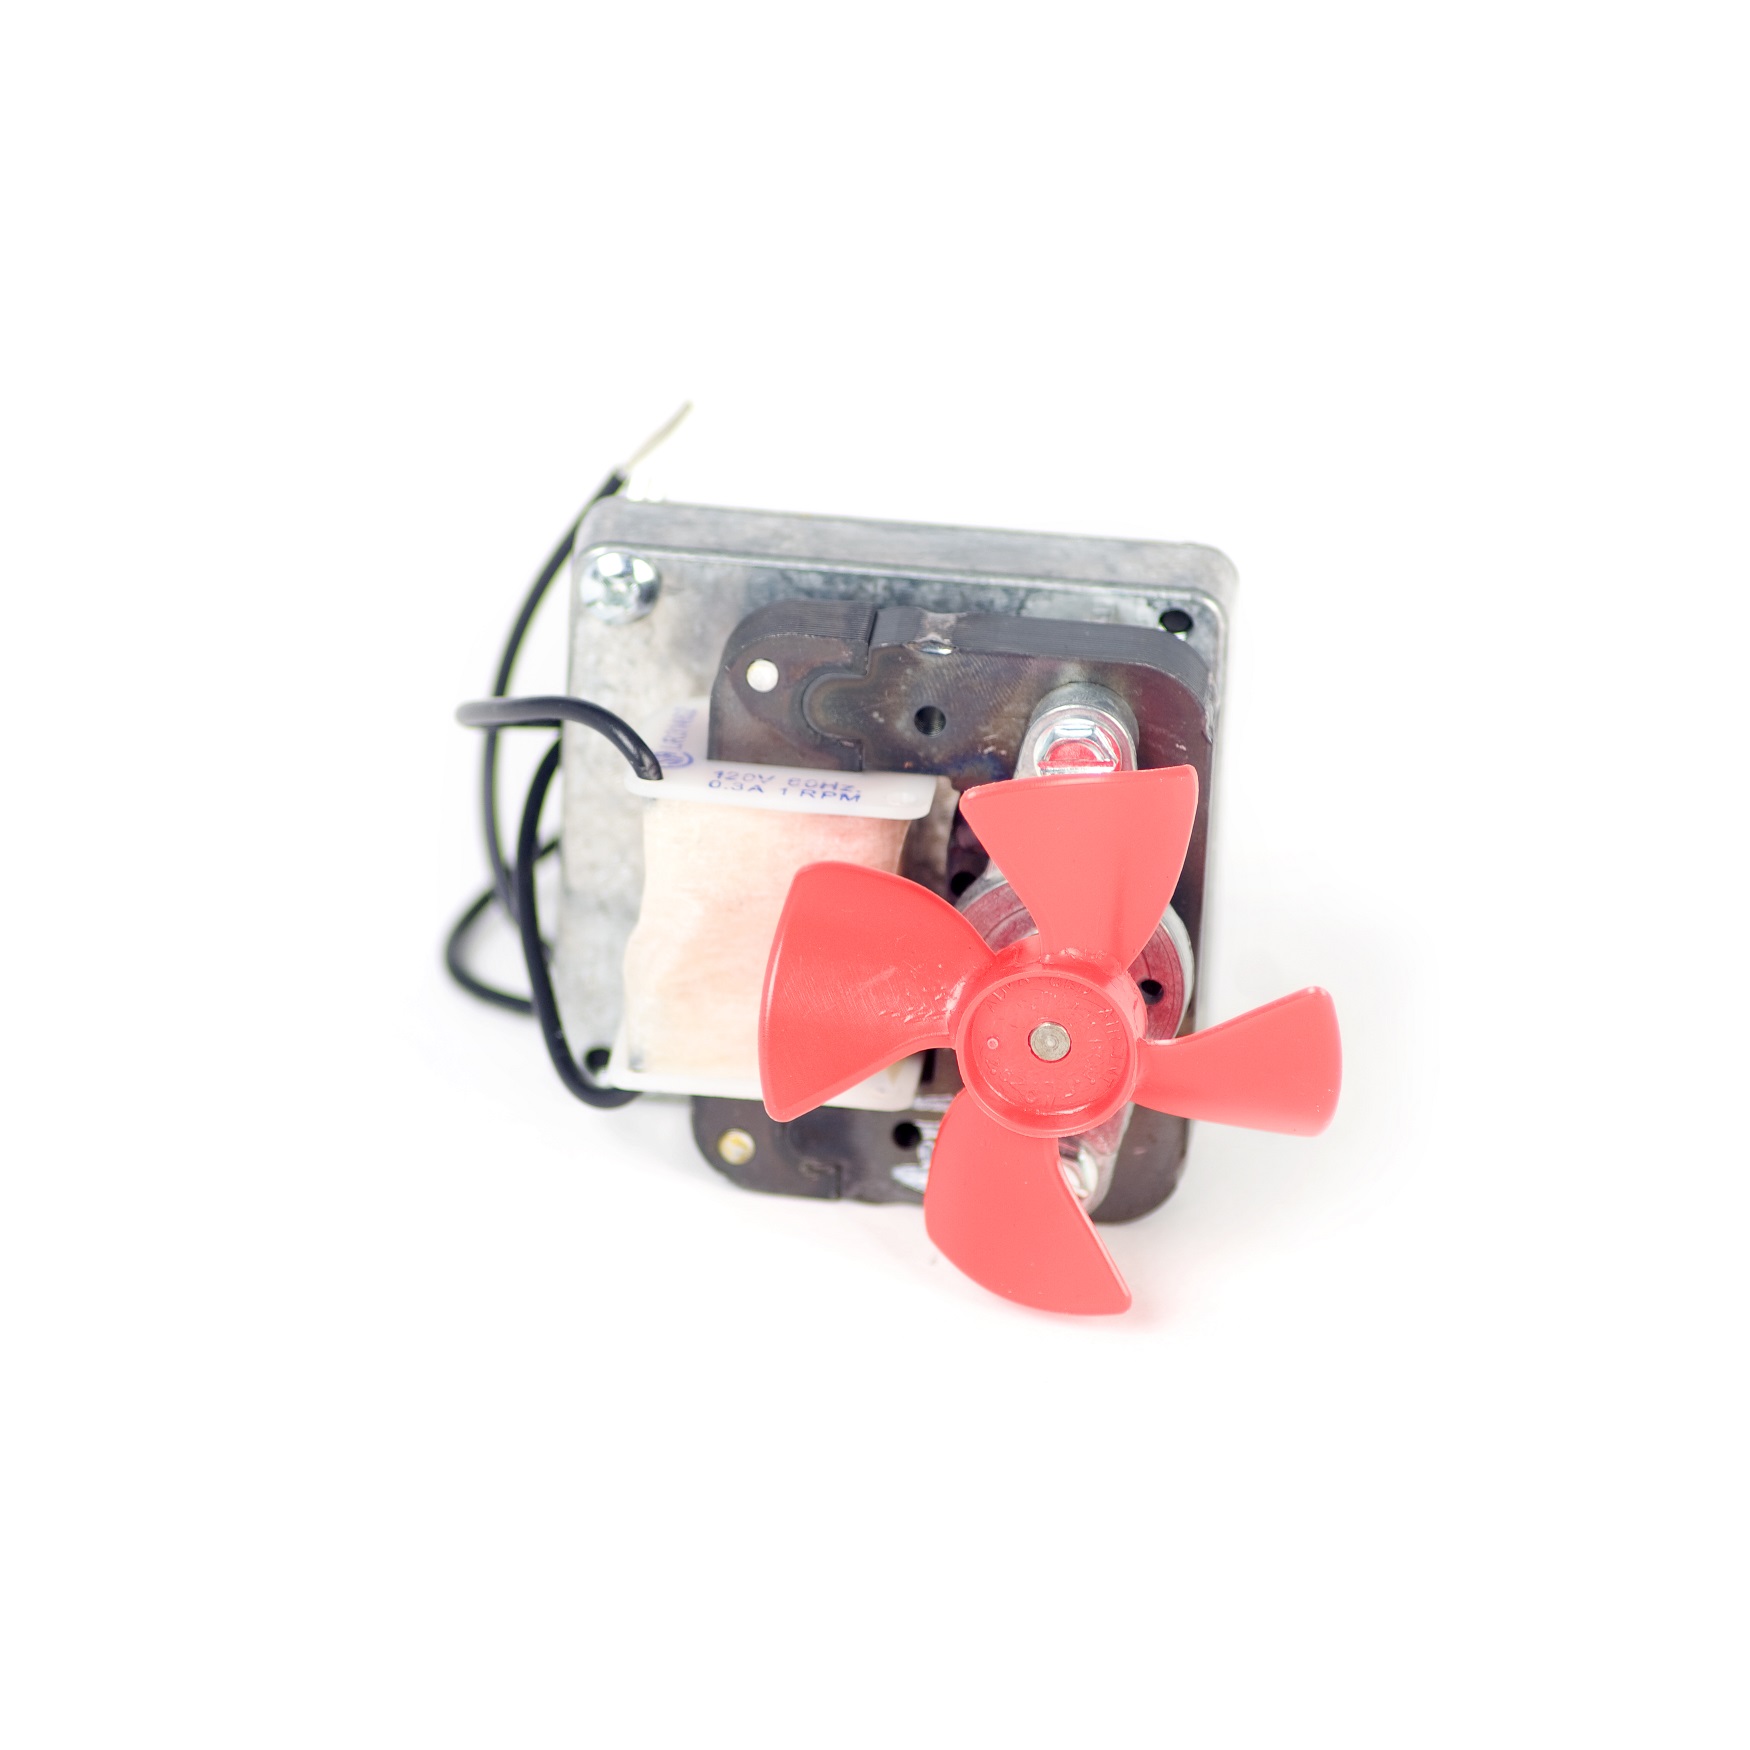 G500 motor with extension - 120V